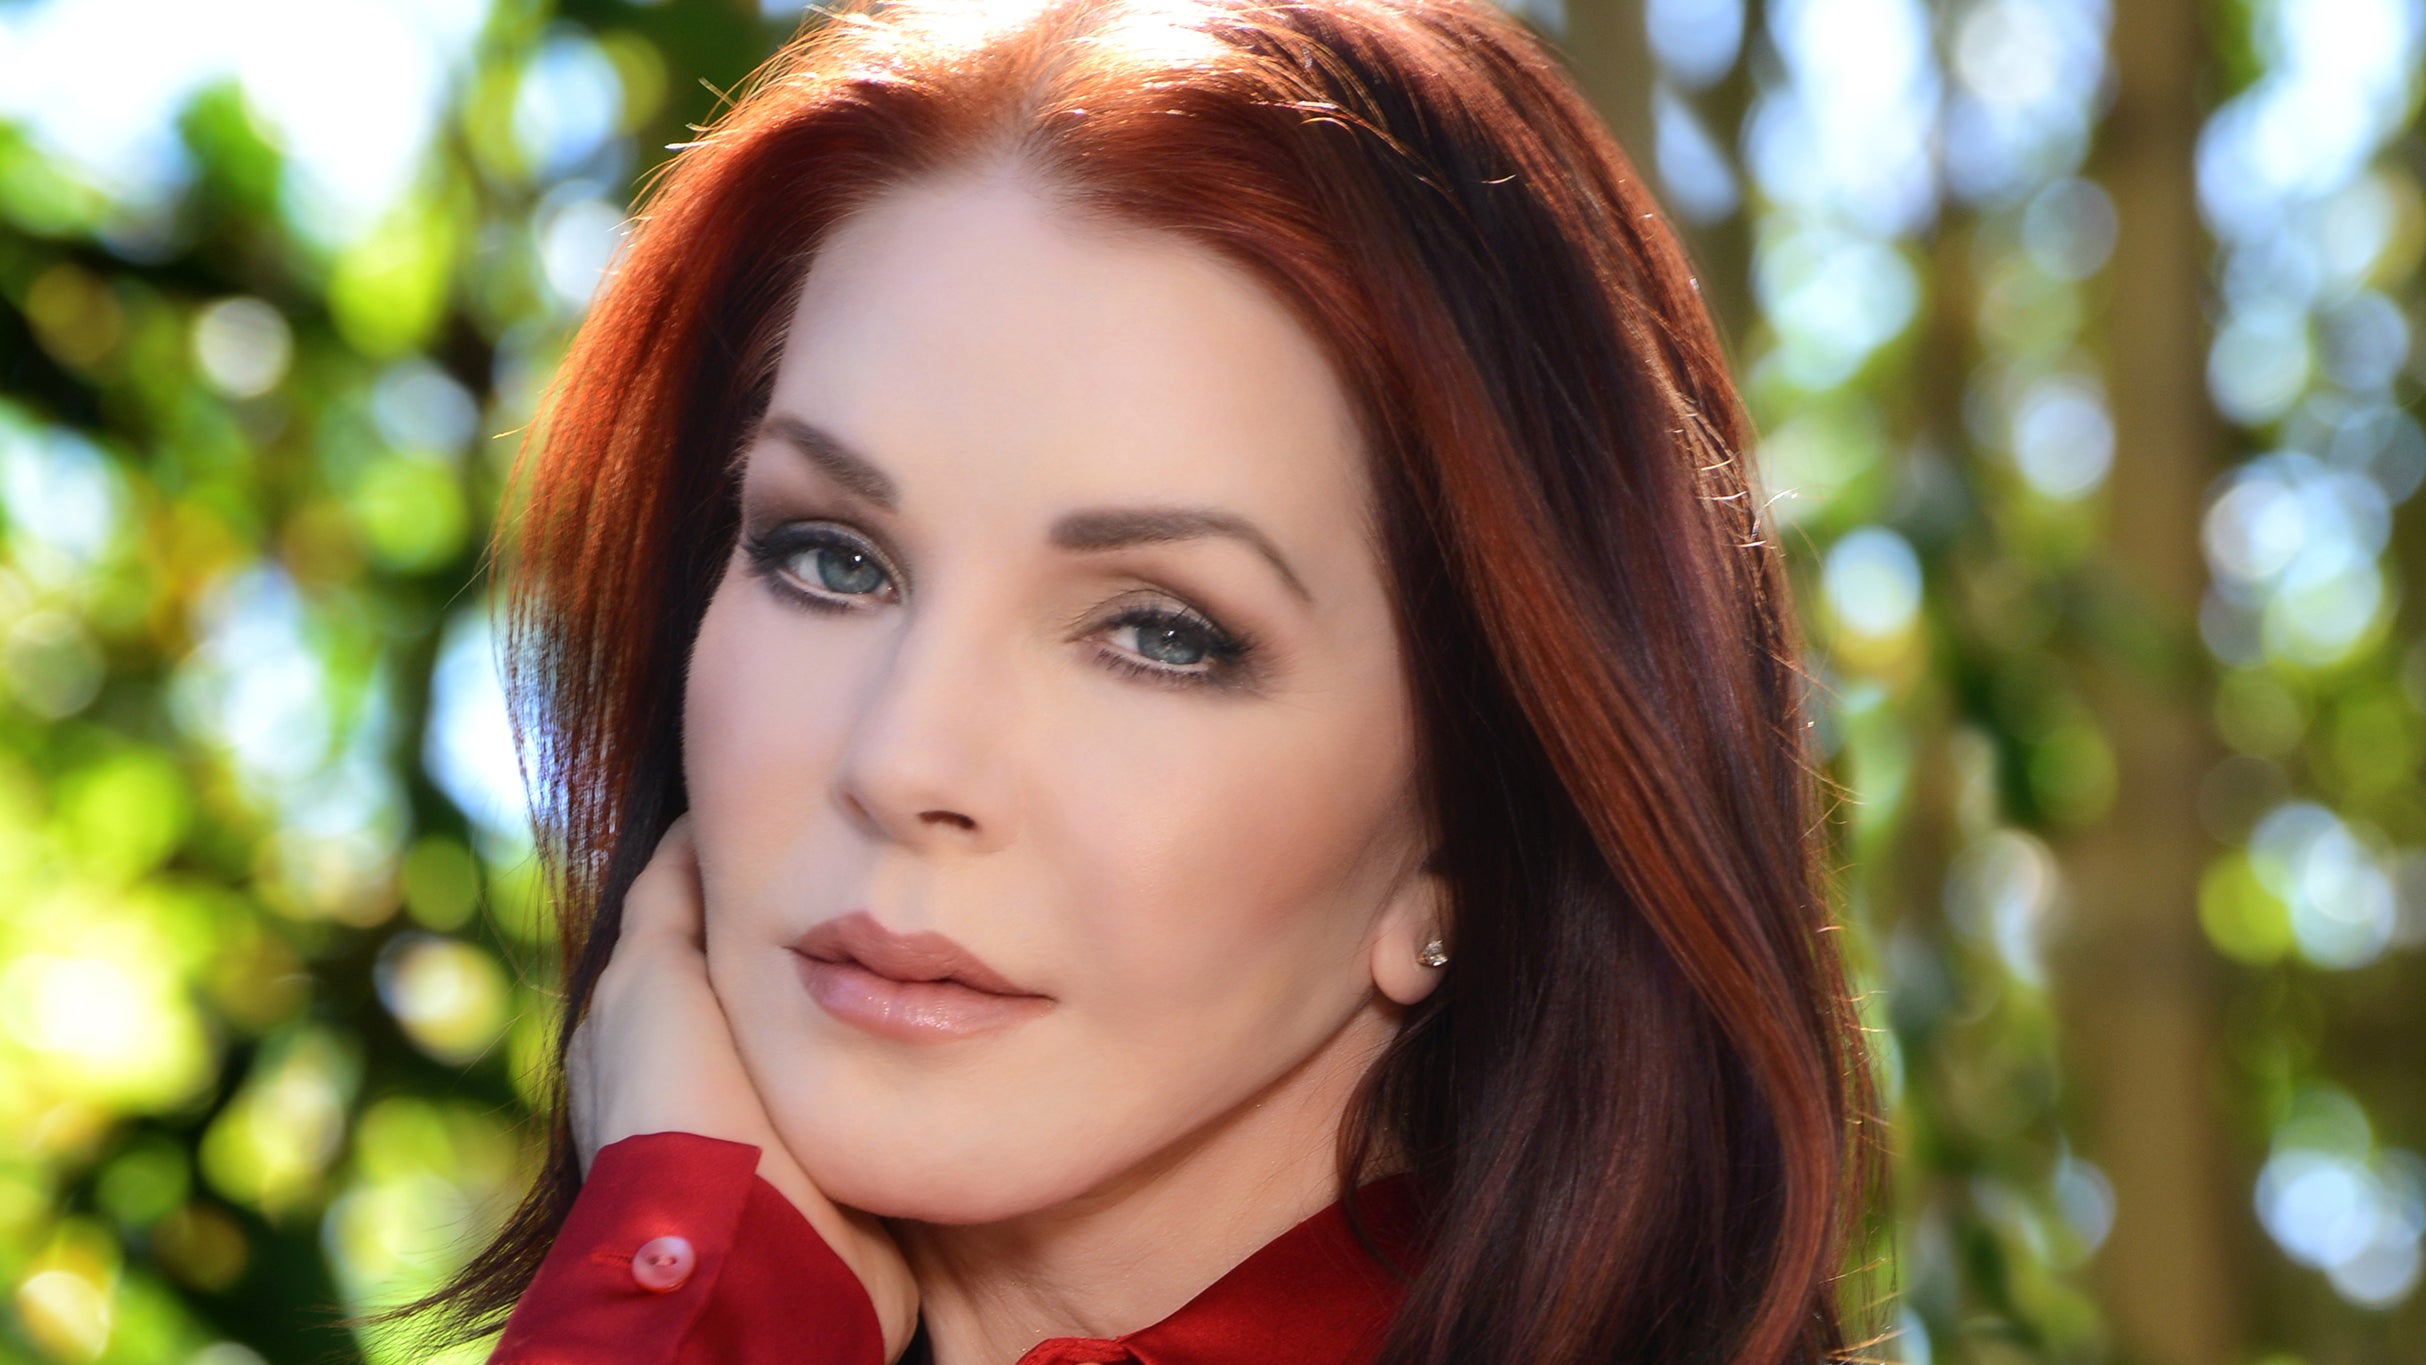 An Evening With Priscilla Presley in Gary promo photo for Unity Member Presale / 21+ ONLY presale offer code